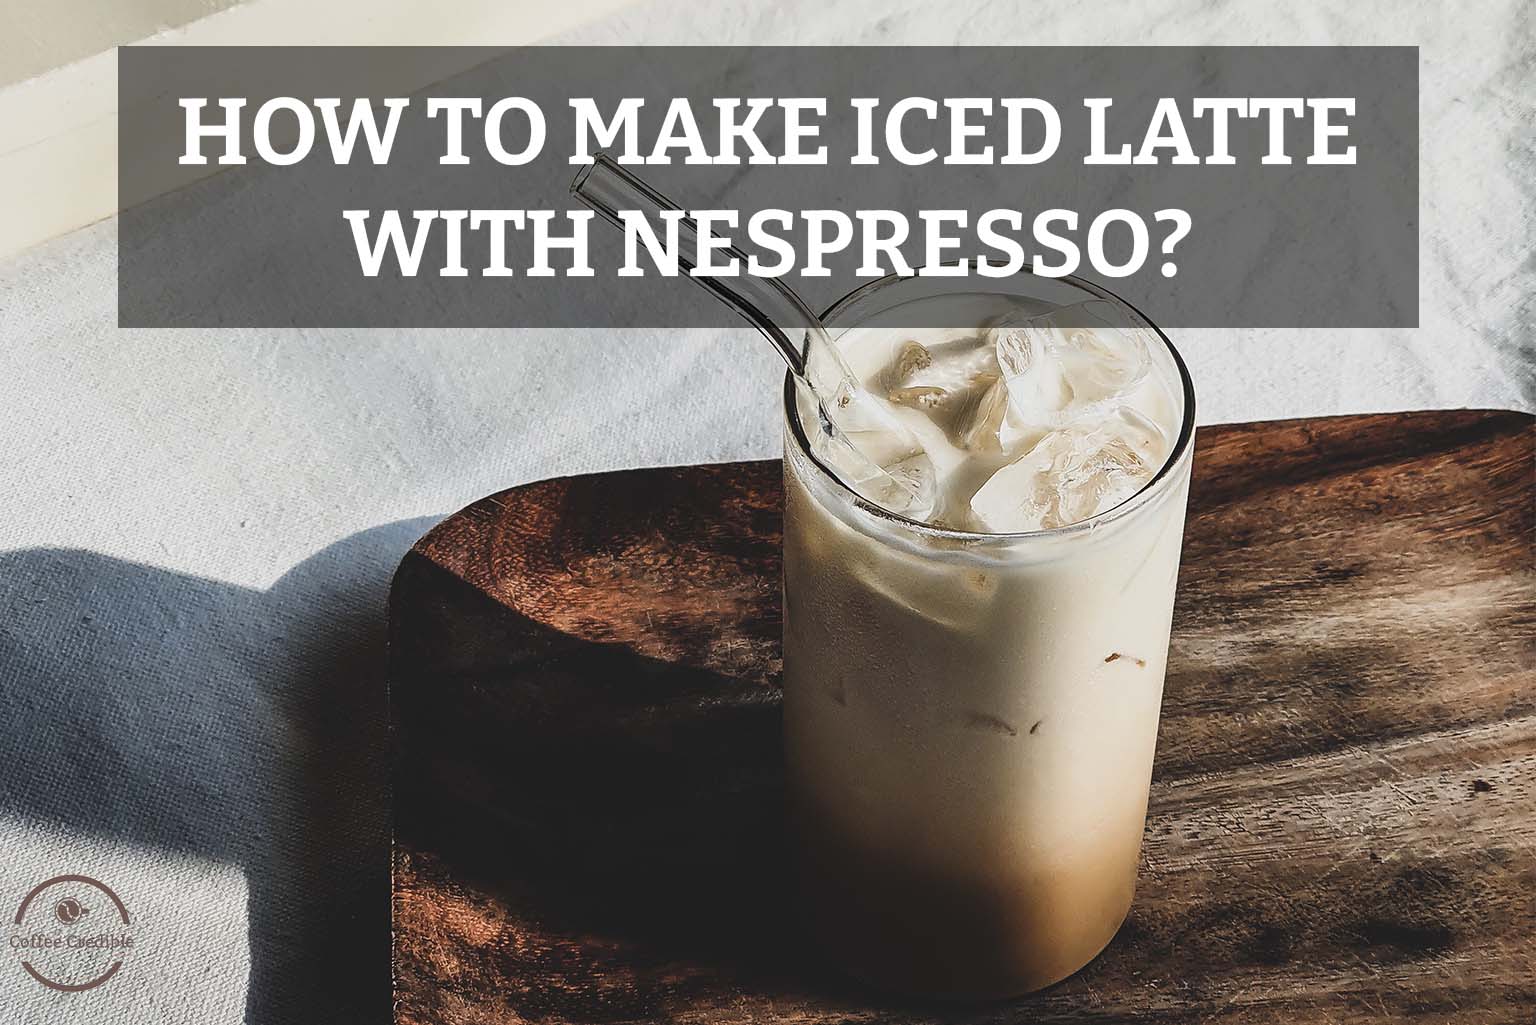 How To Make Iced Latte With Nespresso? [Easy Steps To Follow]